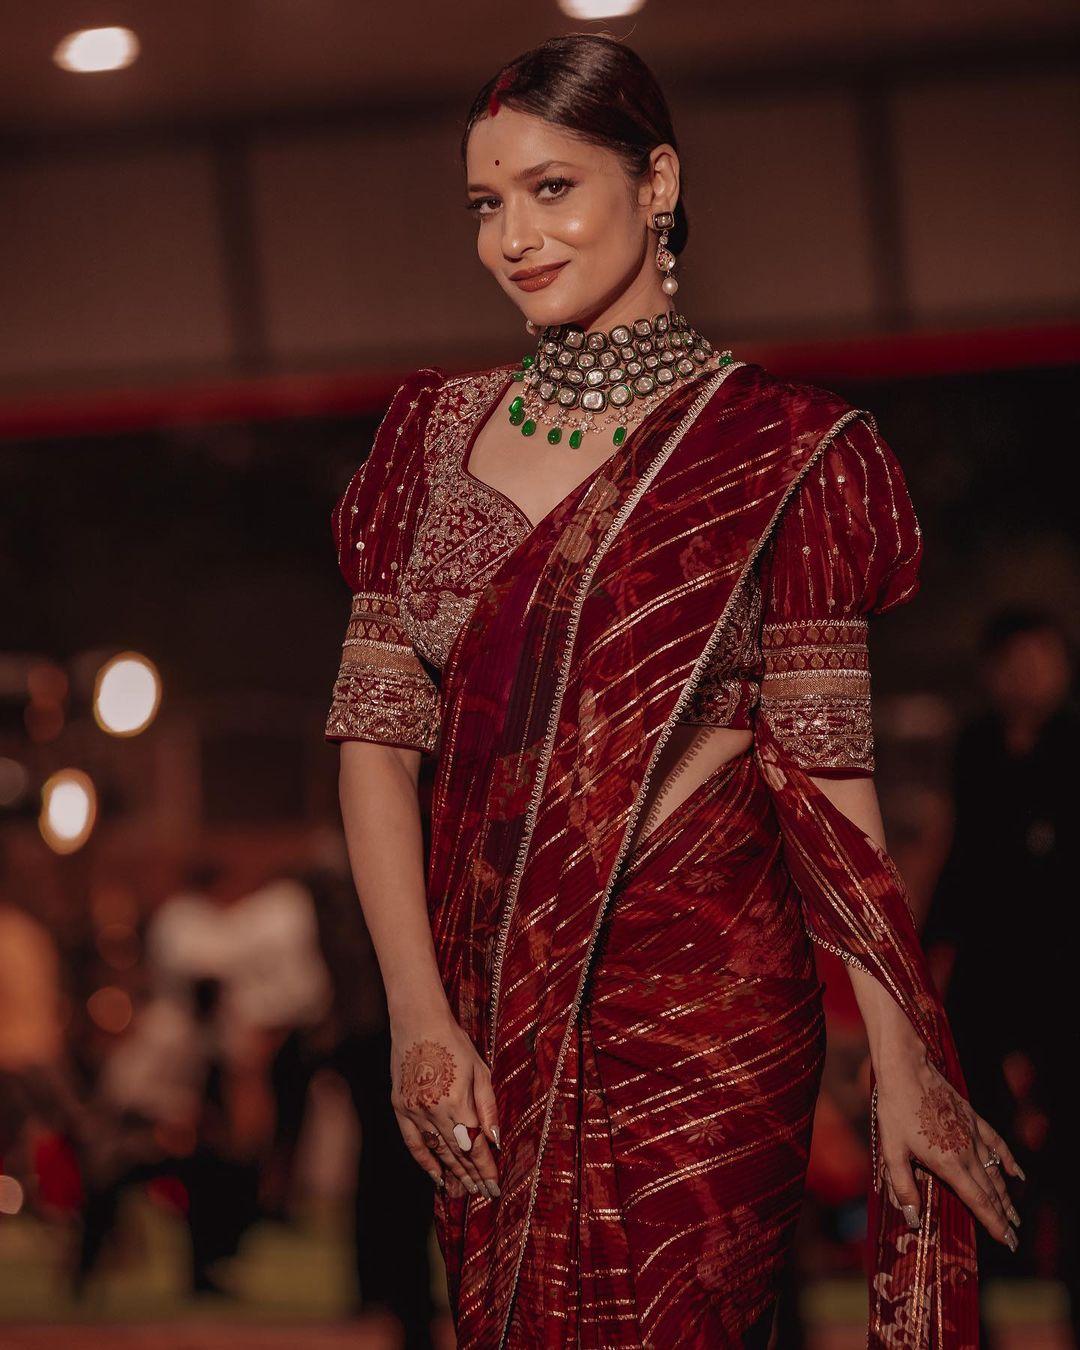 Ankita Lokhande opted for a stunning maroon-coloured saree and paired it with a heavy blouse. The puffed sleeves of the blouse elevated her entire look. If you are planning to wear a saree this Mahashivratri pooja then you have found your perfect match